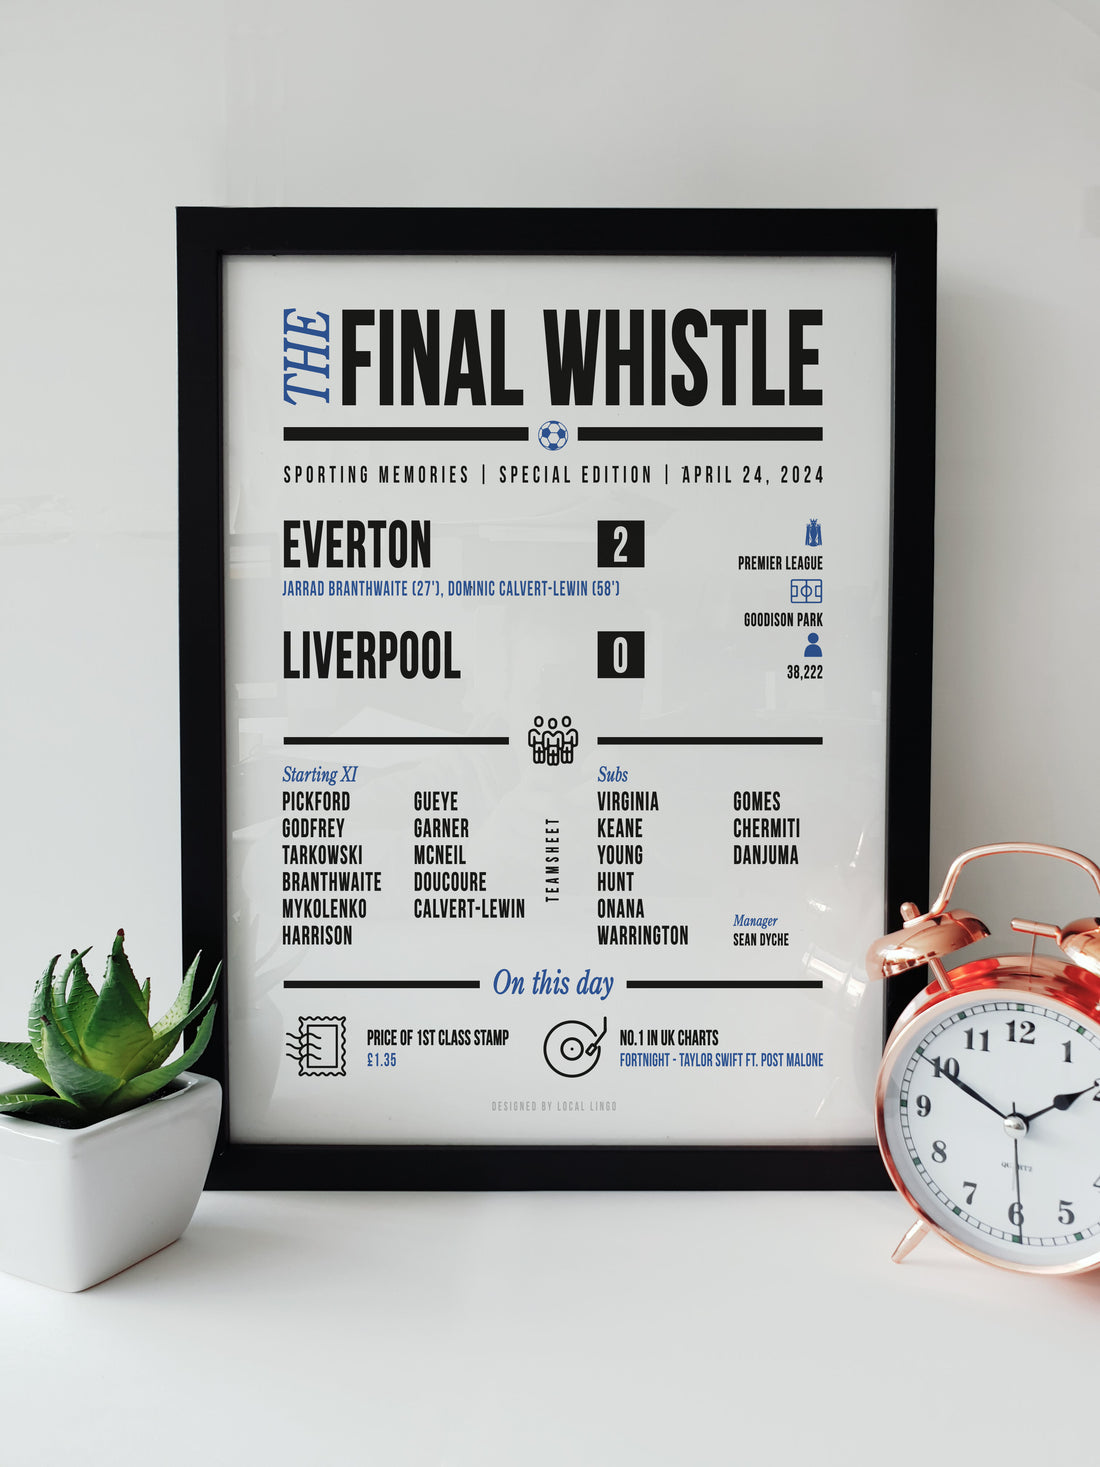 A vintage-style football print celebrating Everton's 2-0 victory over Liverpool with a mock newspaper design including lineups and match details.